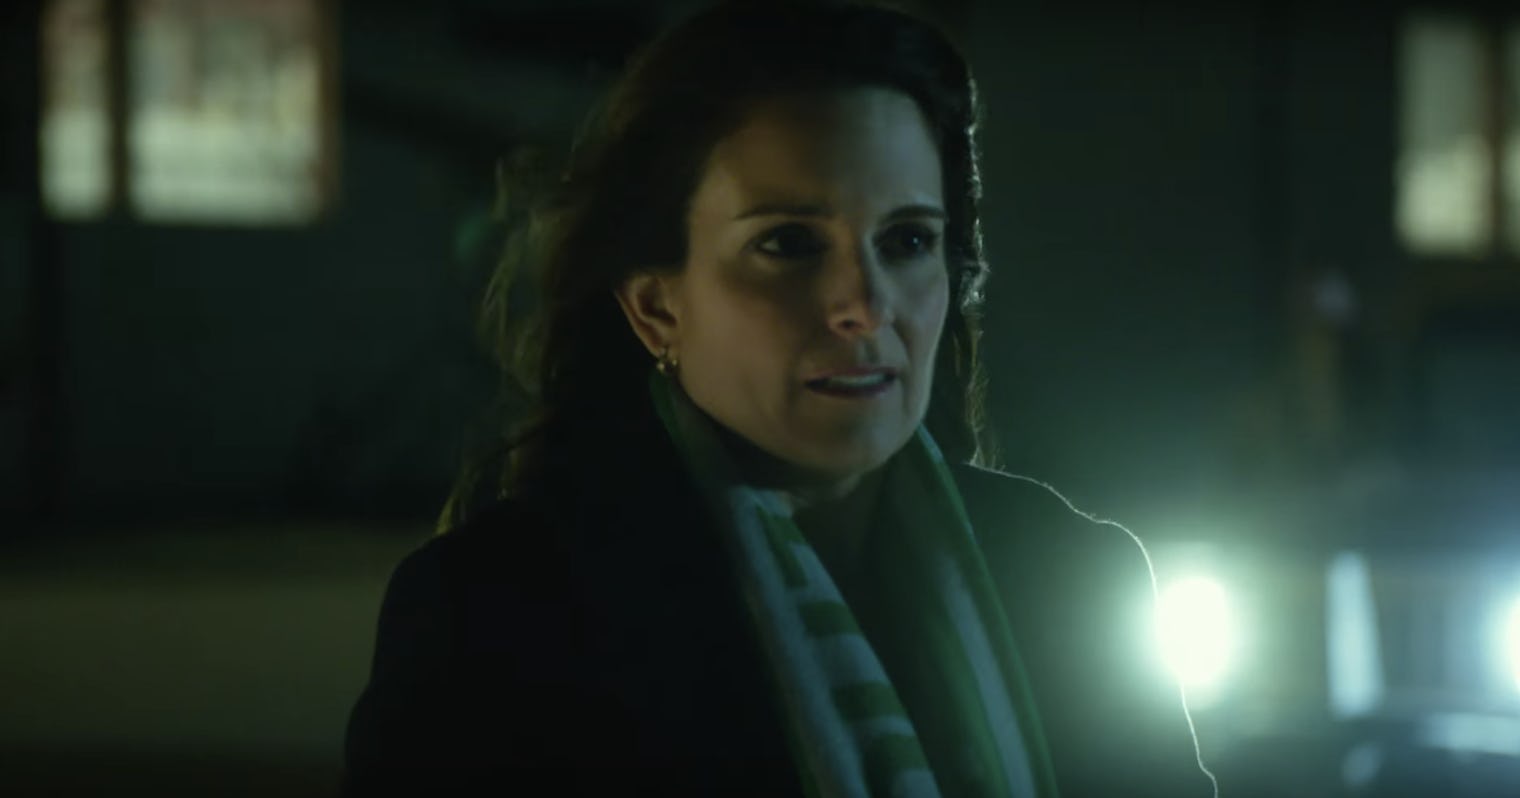 Tina Fey In The First Whiskey Tango Foxtrot Trailer Makes The Most Amazing Expressions — Video